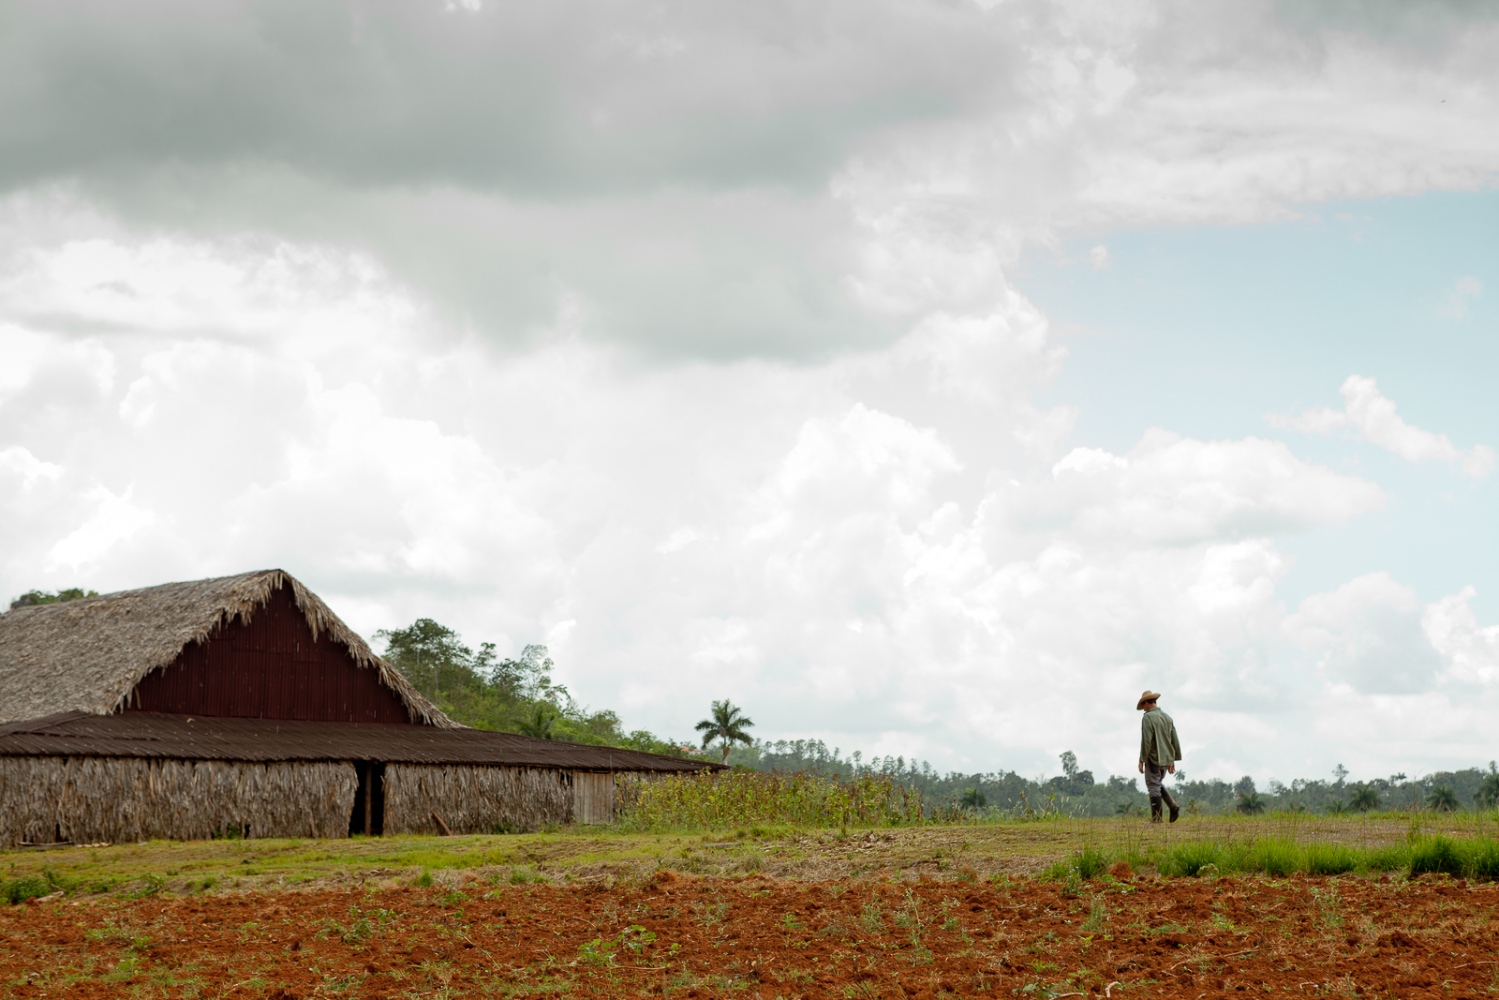  A tobacco farmer heads to his barn where leaves hang to dry. This reminded me of my childhood in...